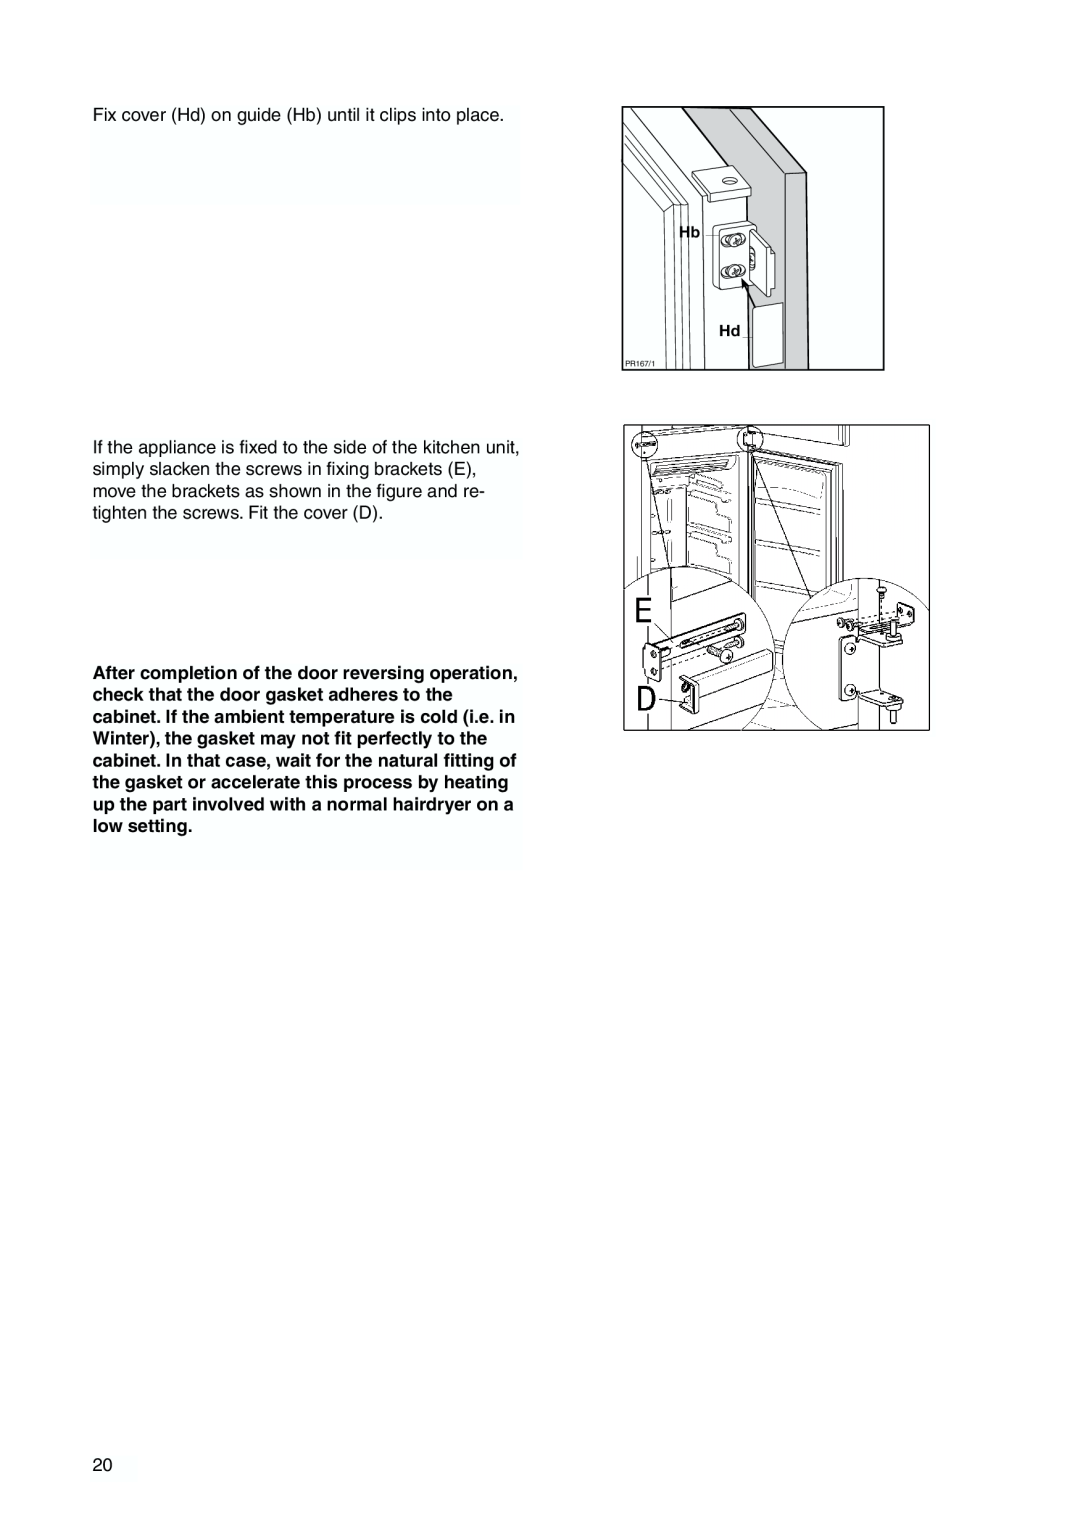 Zanussi ZI 918/9 FFA manual Fix cover Hd on guide Hb until it clips into place 